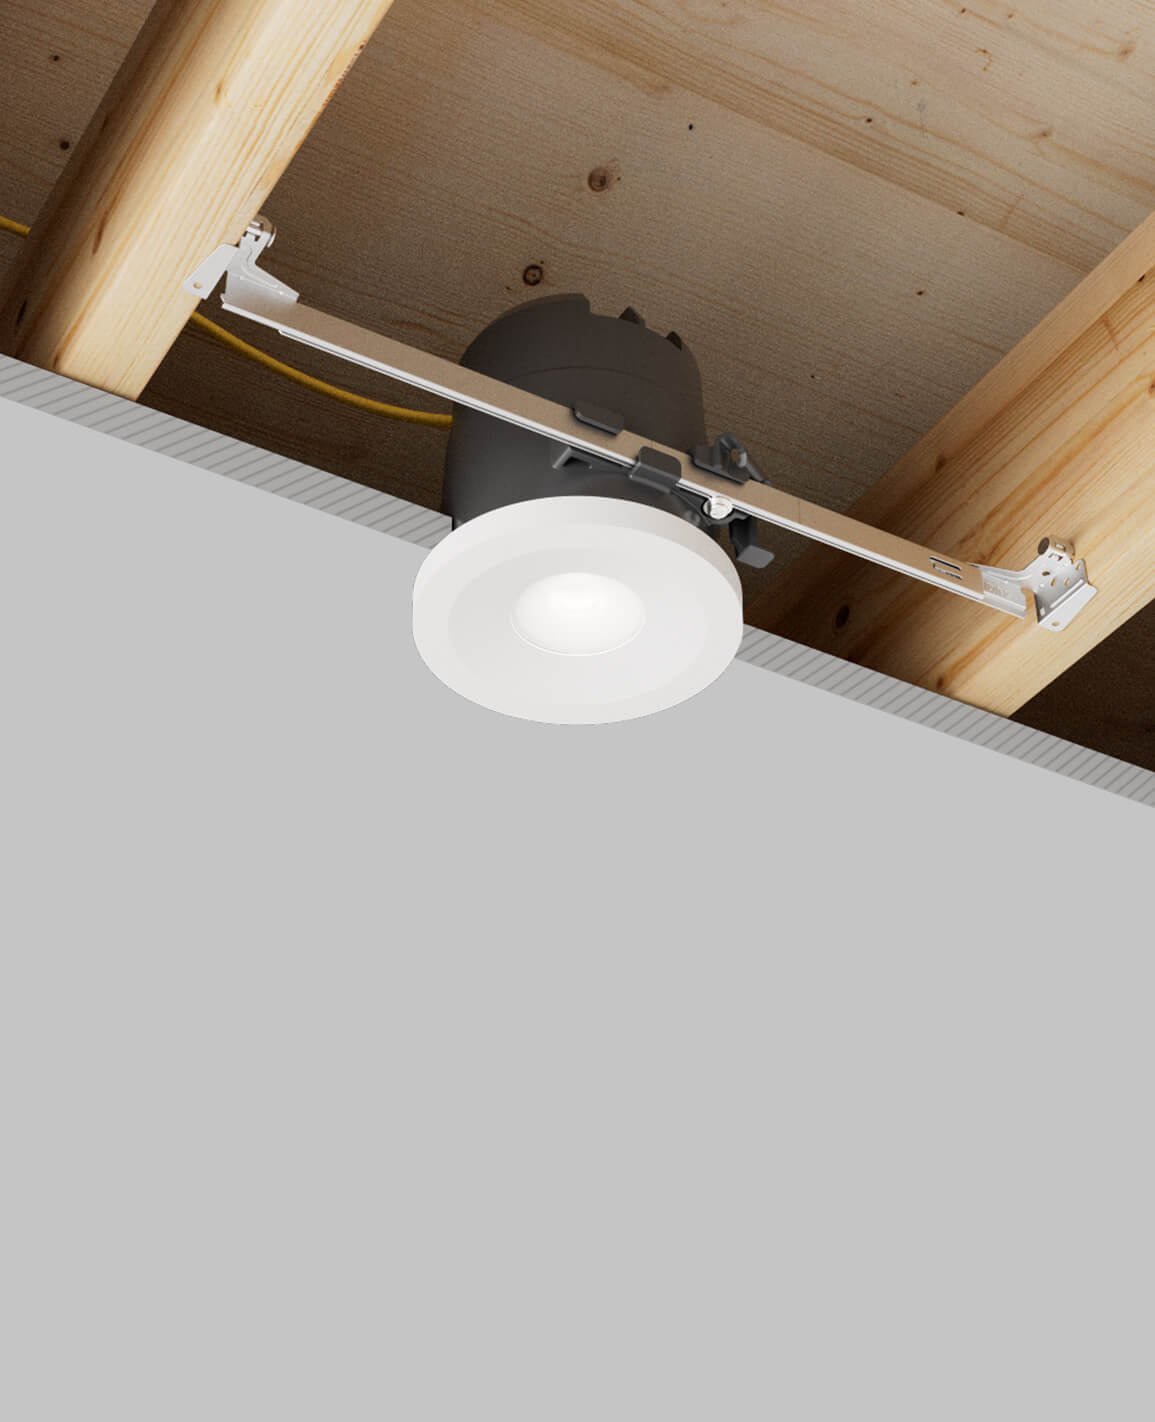 LUSA 4" recessed light with bar hangers housing and white surface trim